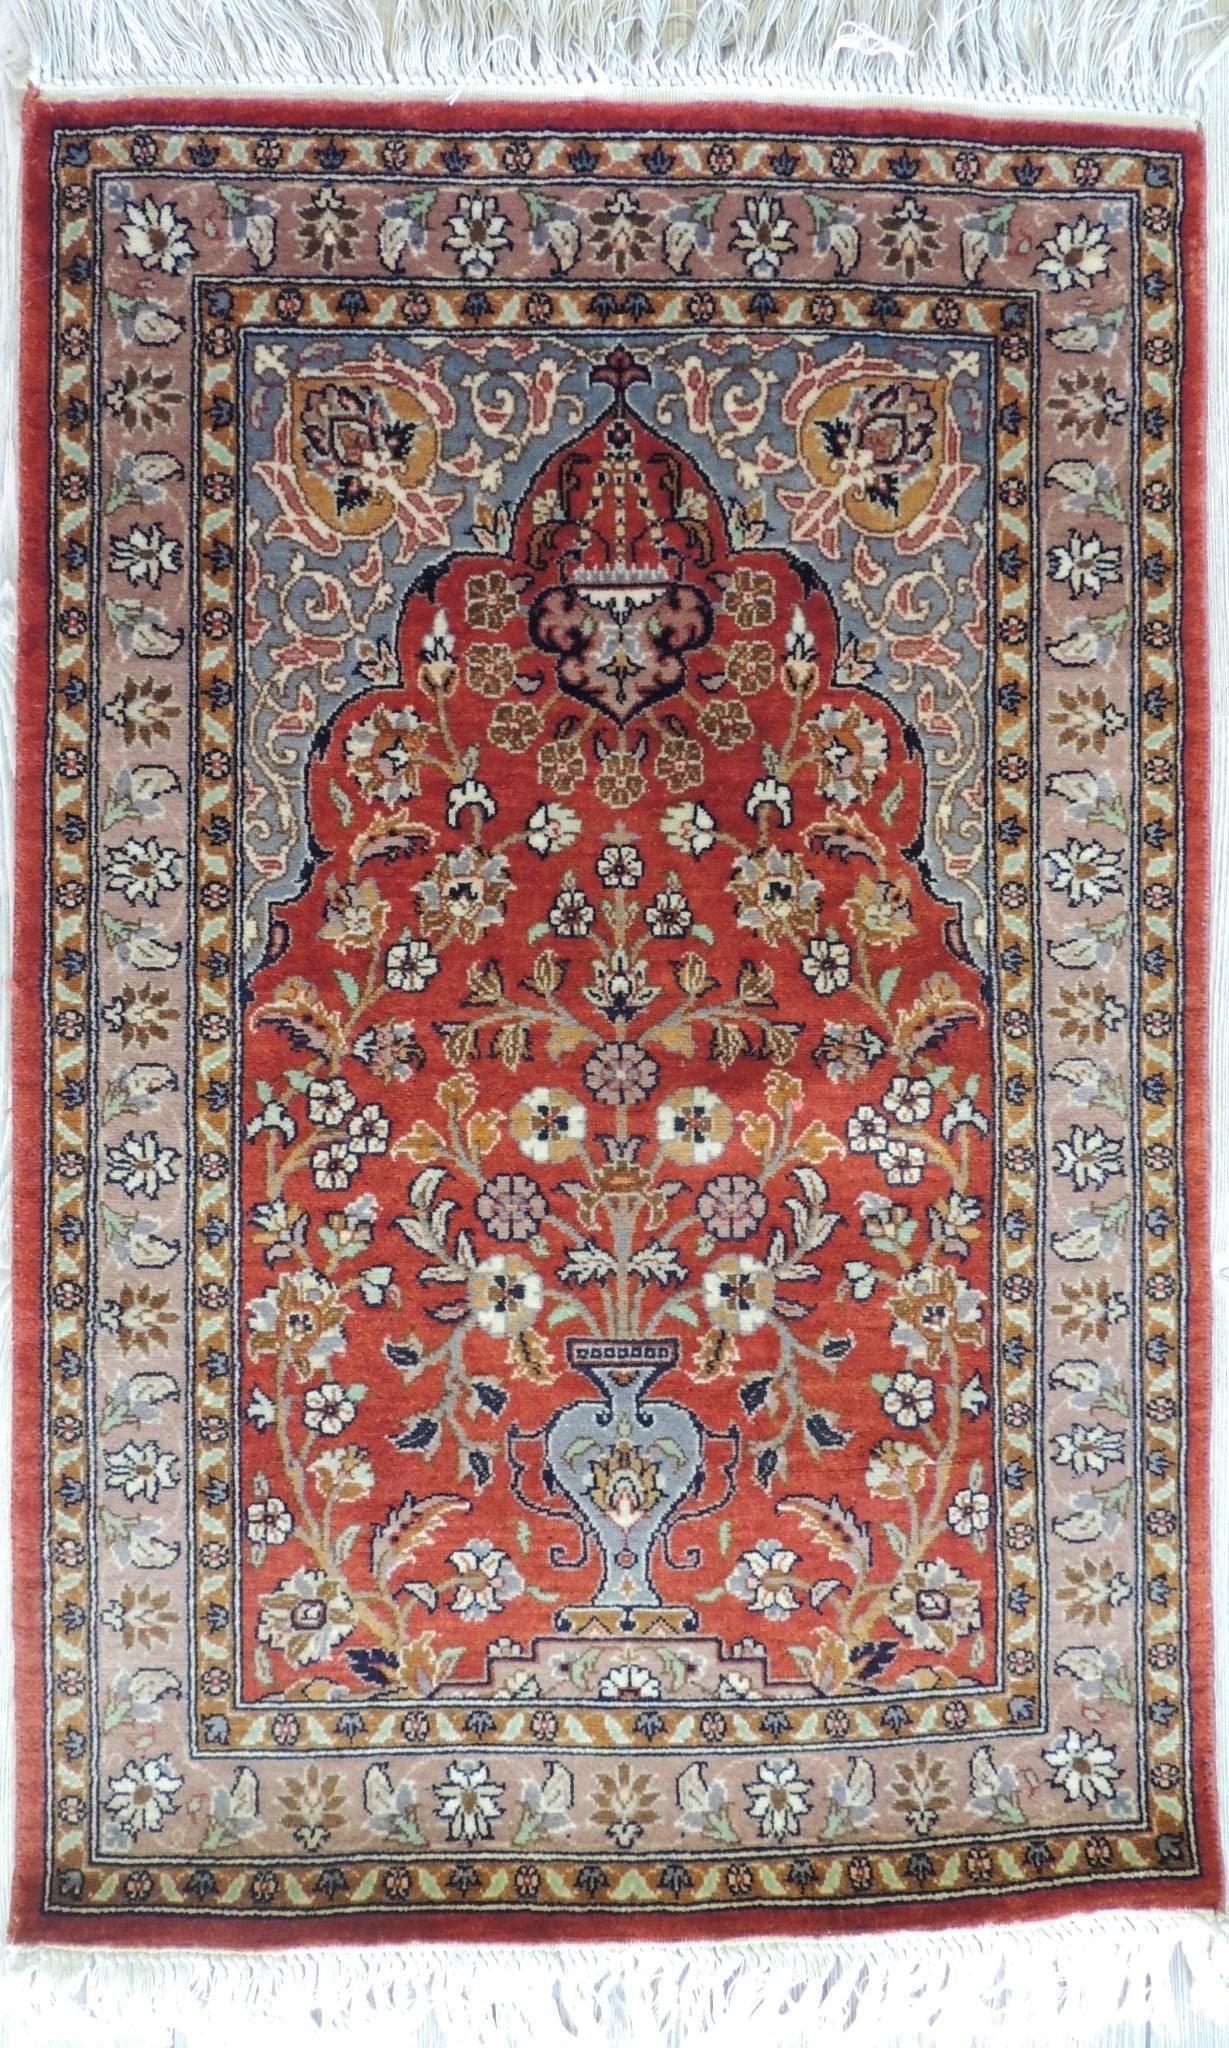 Exquisite Small Prayer Rug 2x3 Ft